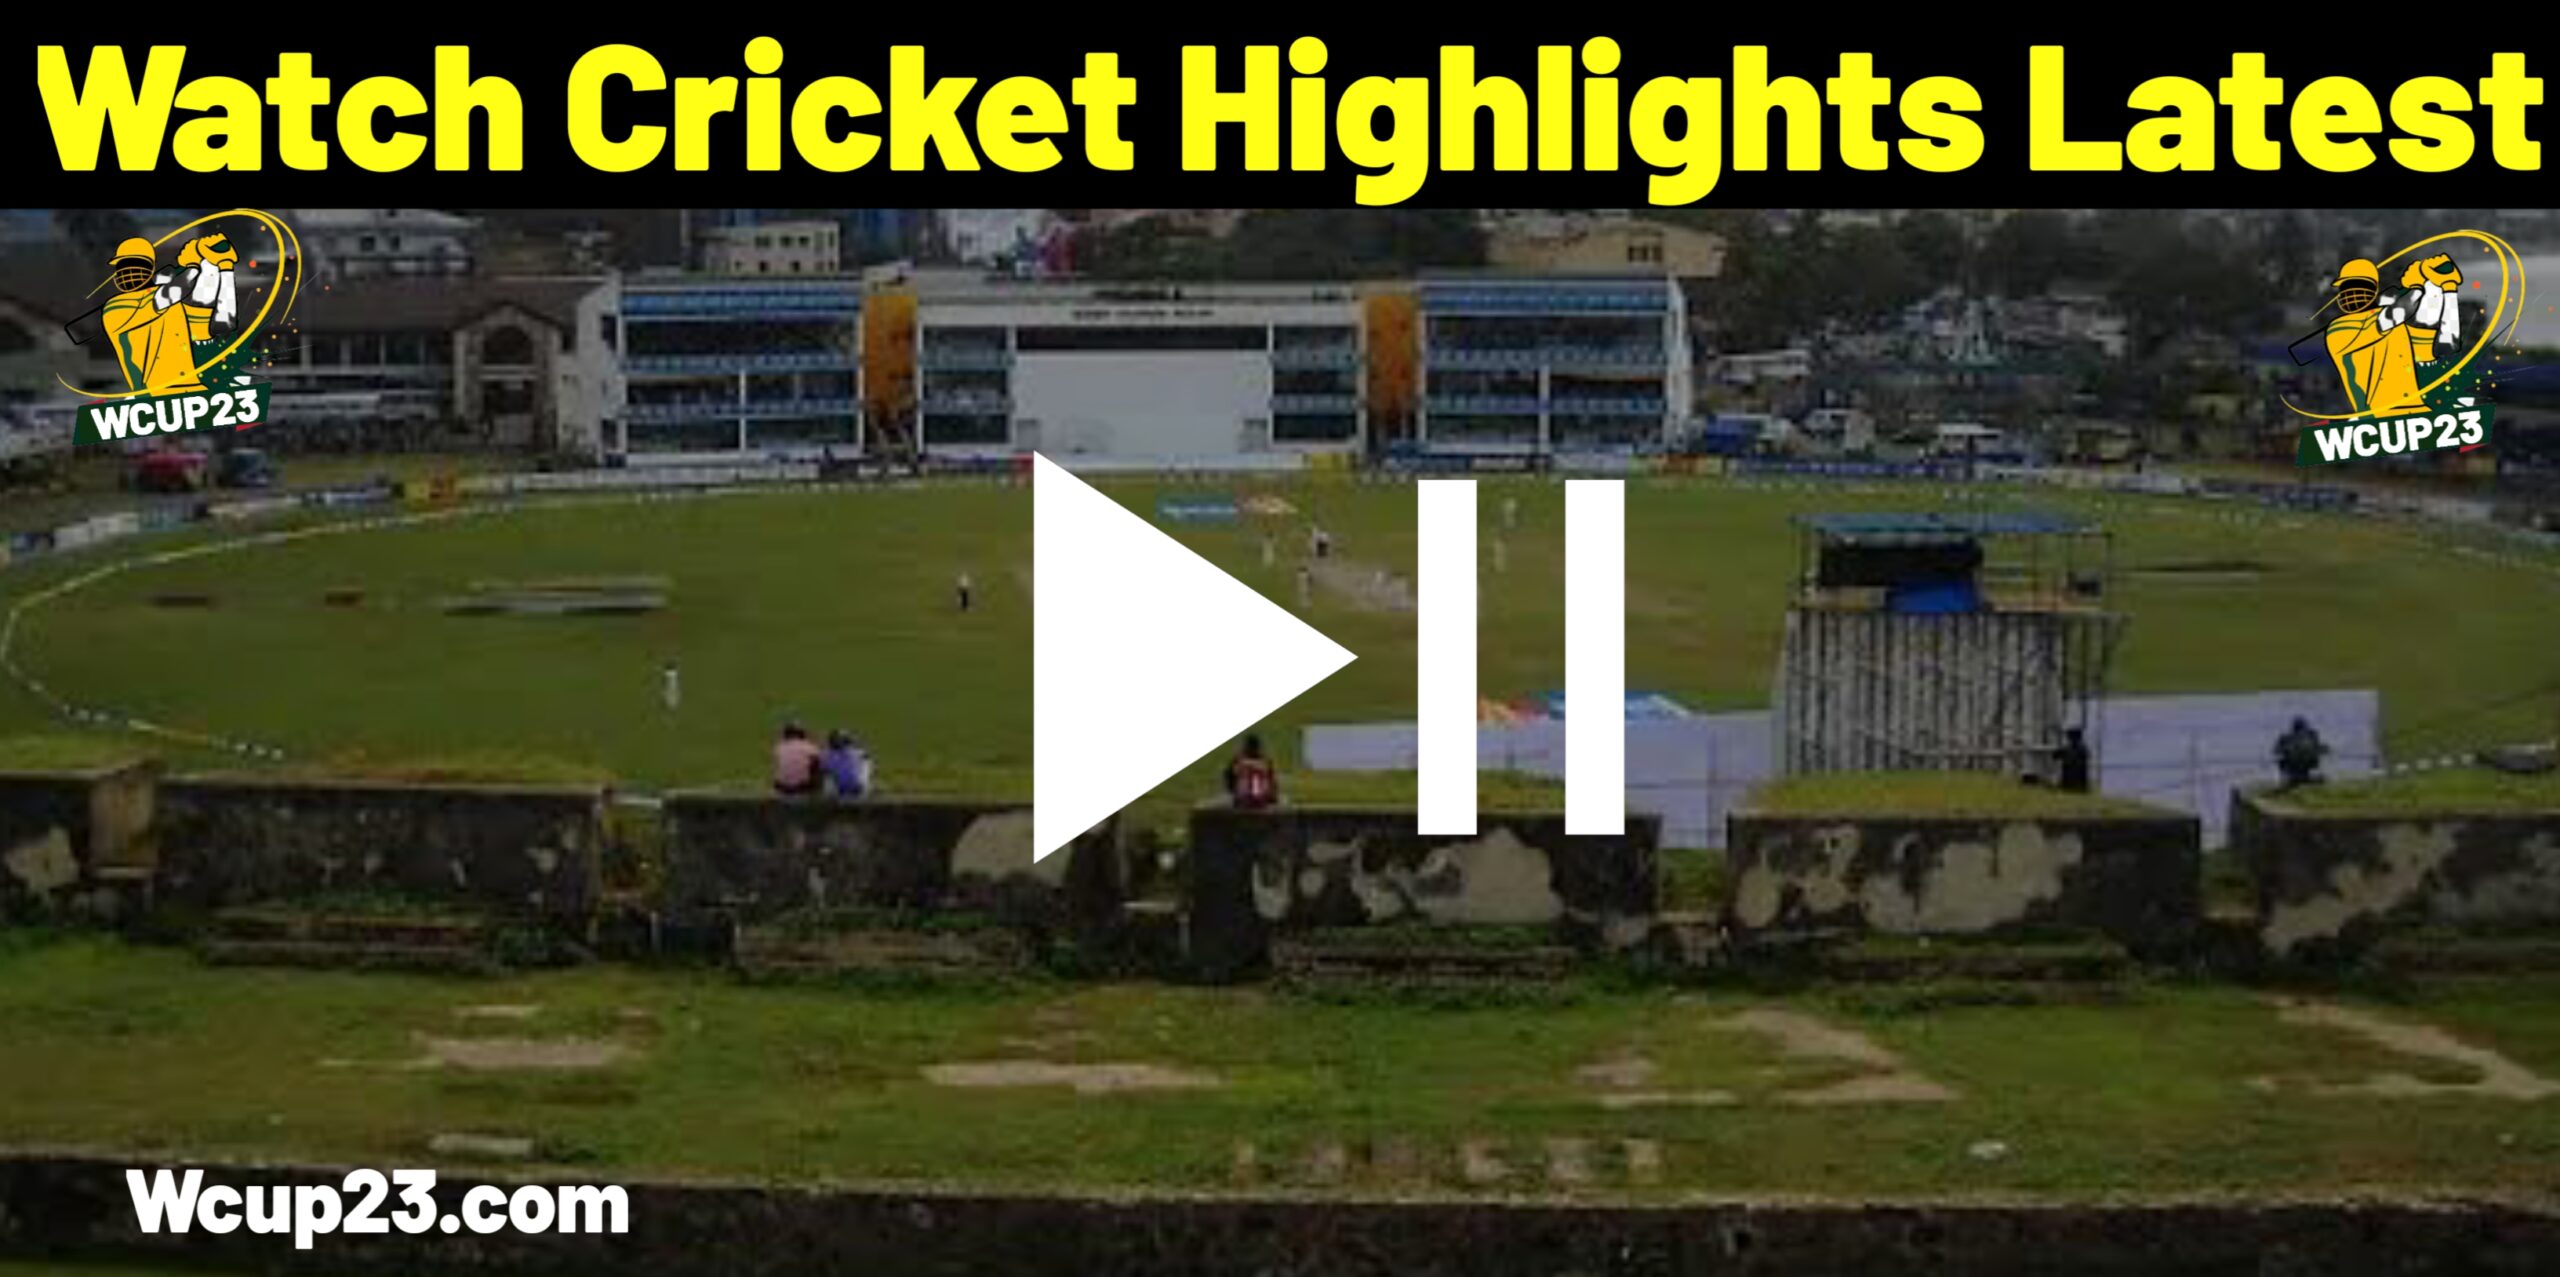 Cricket Highlights How To Watch Cricket Match Highlights Latest Today Highlights